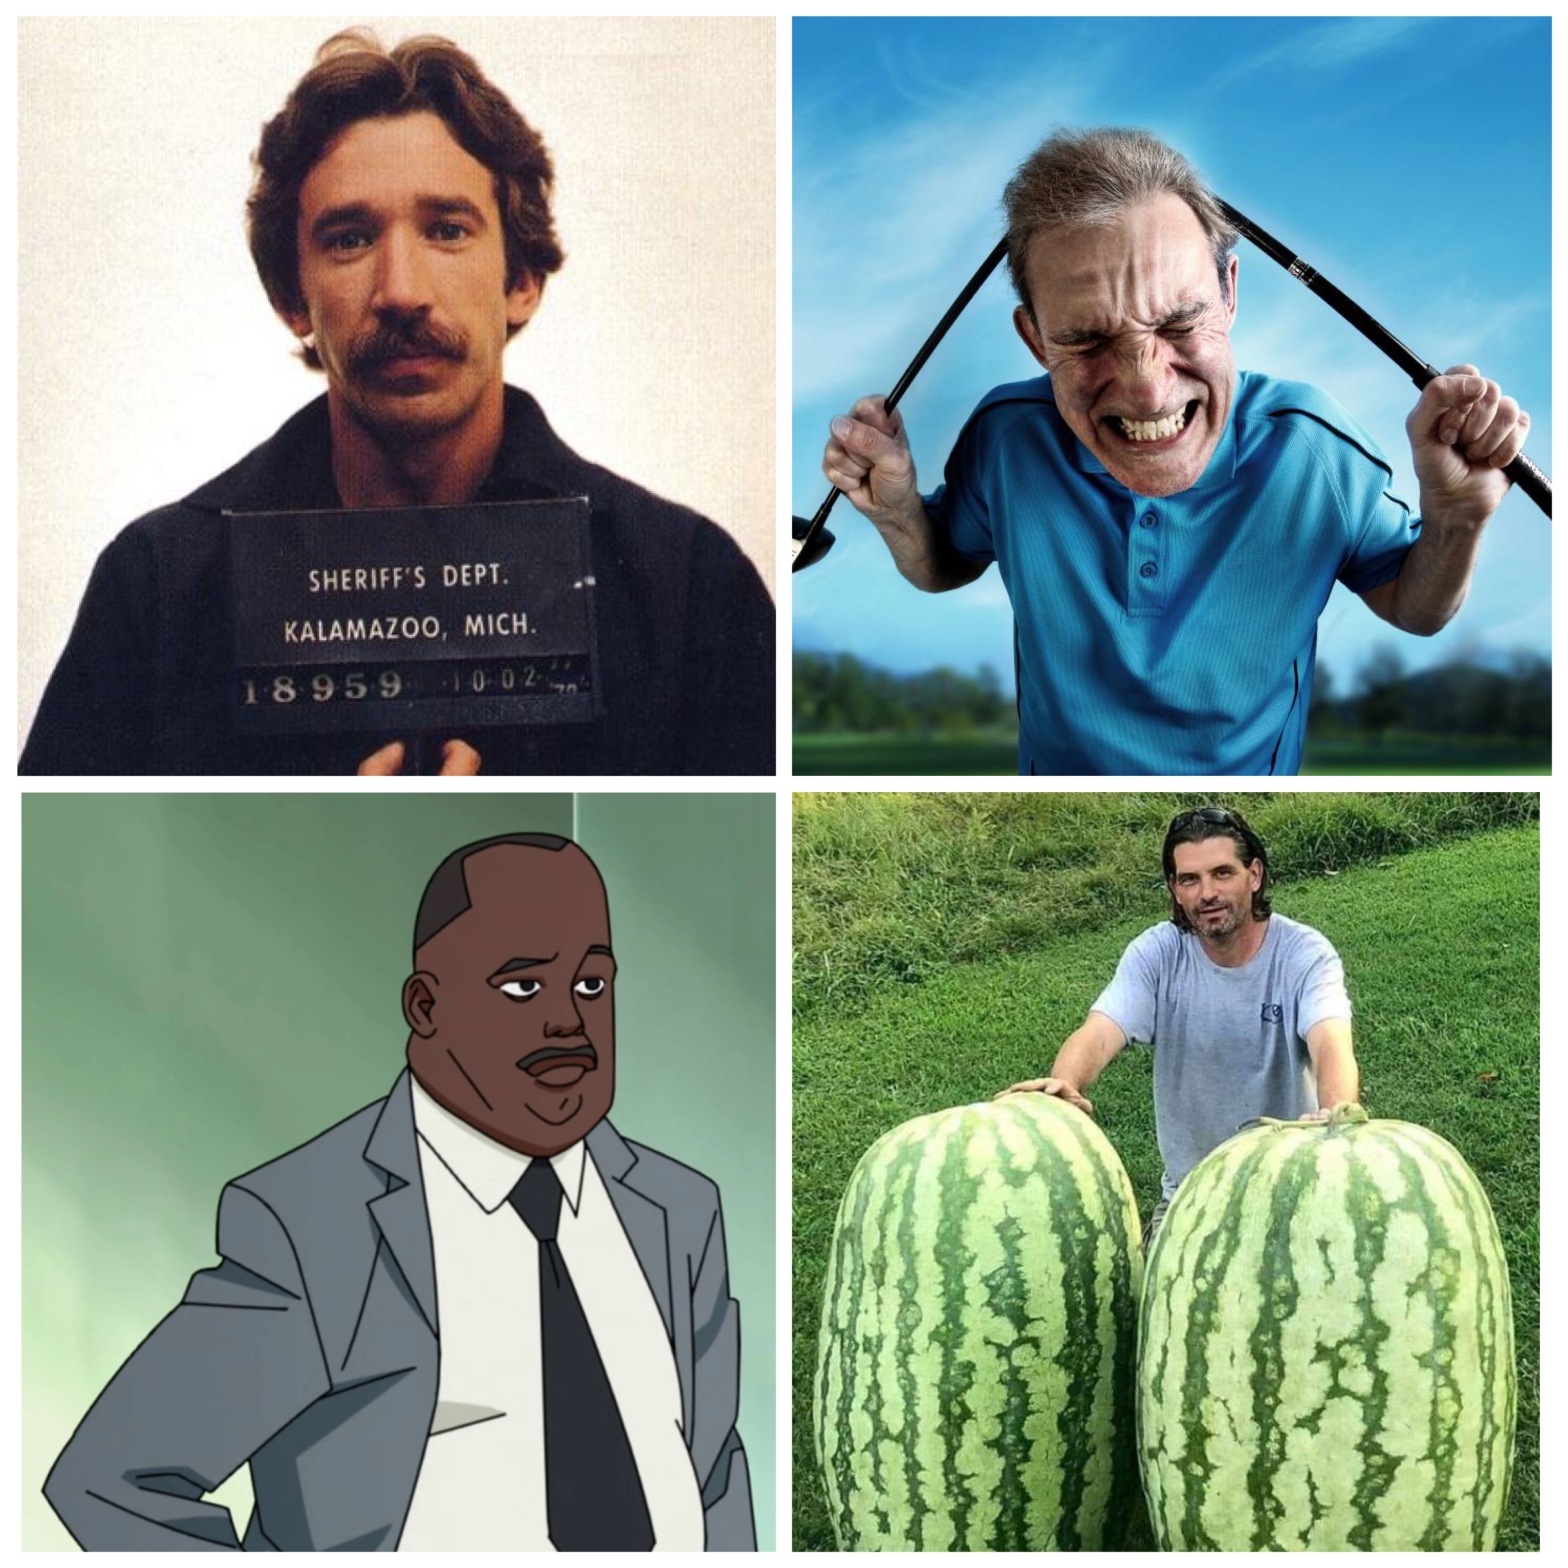 Tim Allen's mugshot, an angry golfer, Principal Winslow from Invincible, and two giant, smooth watermelons.